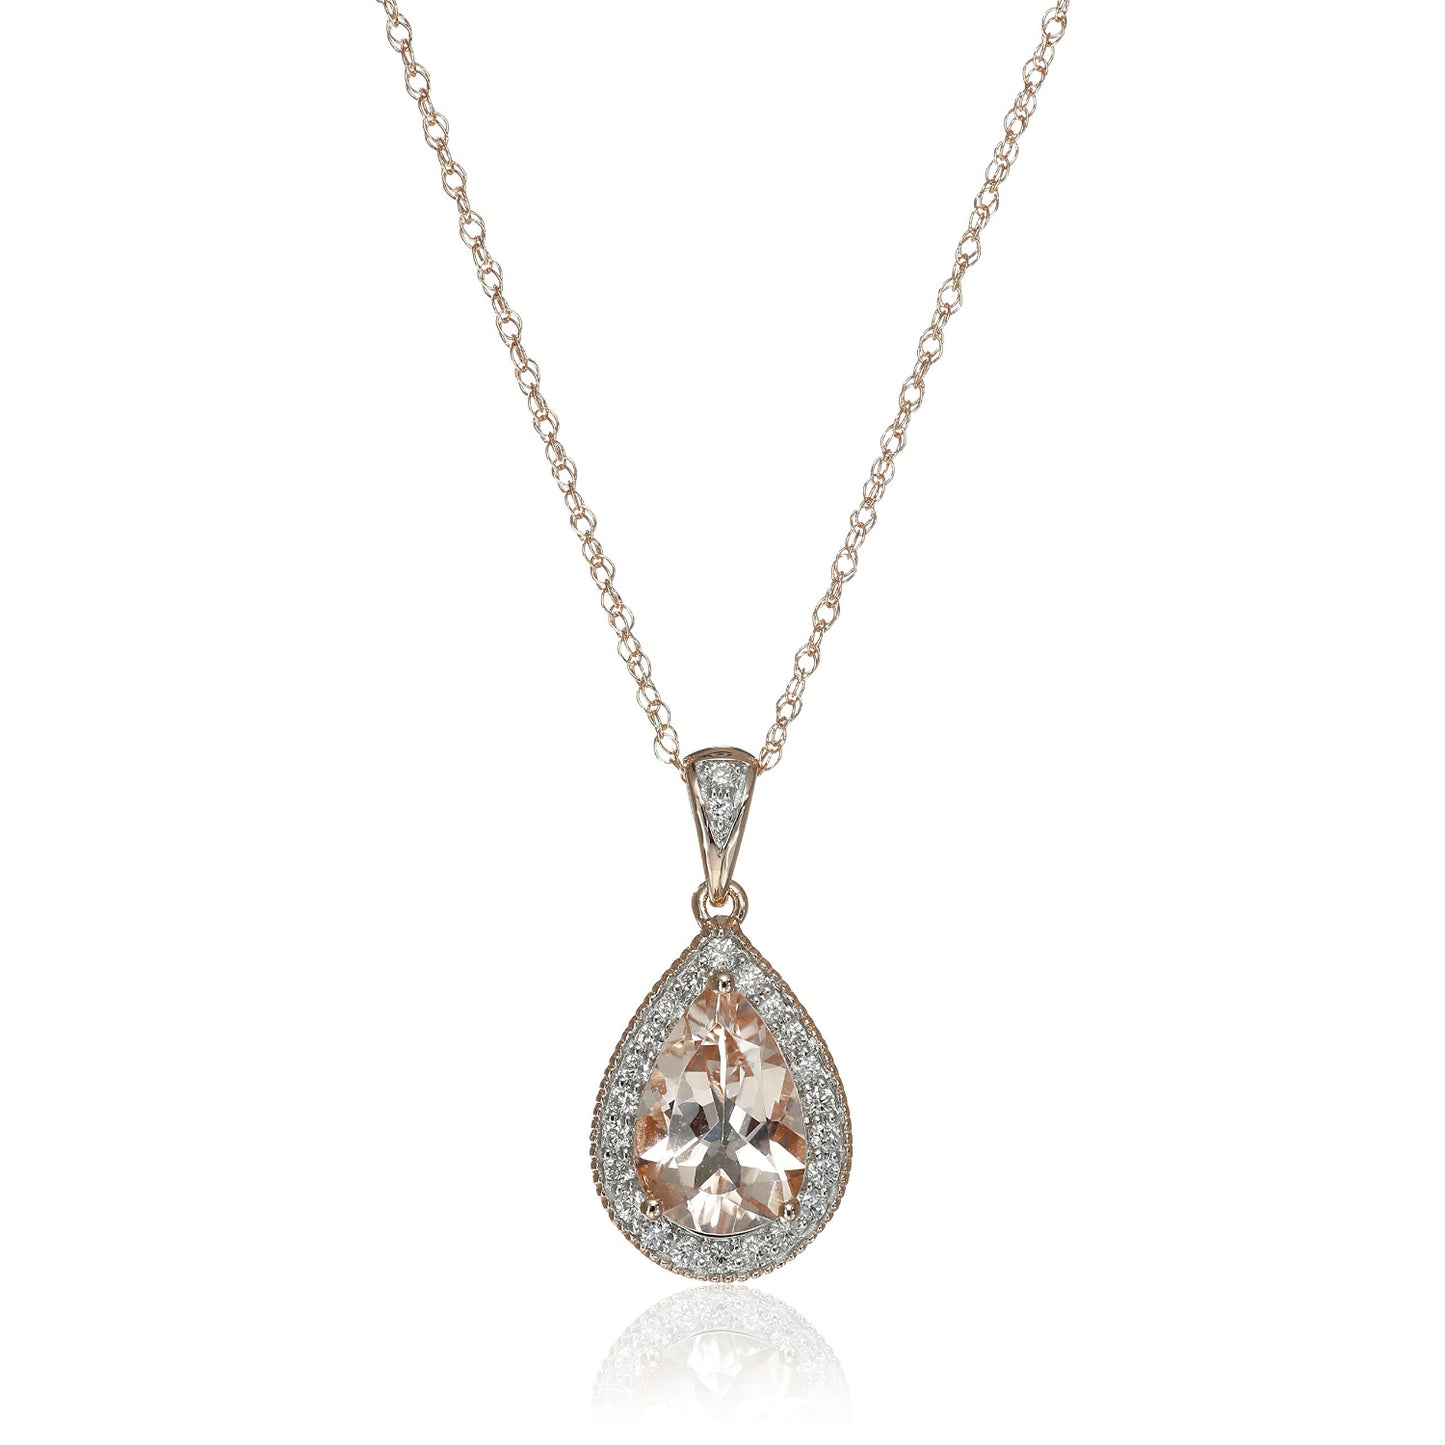 14k Rose Gold Morganite and Diamond Solitaire Pendant Necklace (1/2cttw, H-I Color, I1-I2 Clarity), 18" - Pinctore